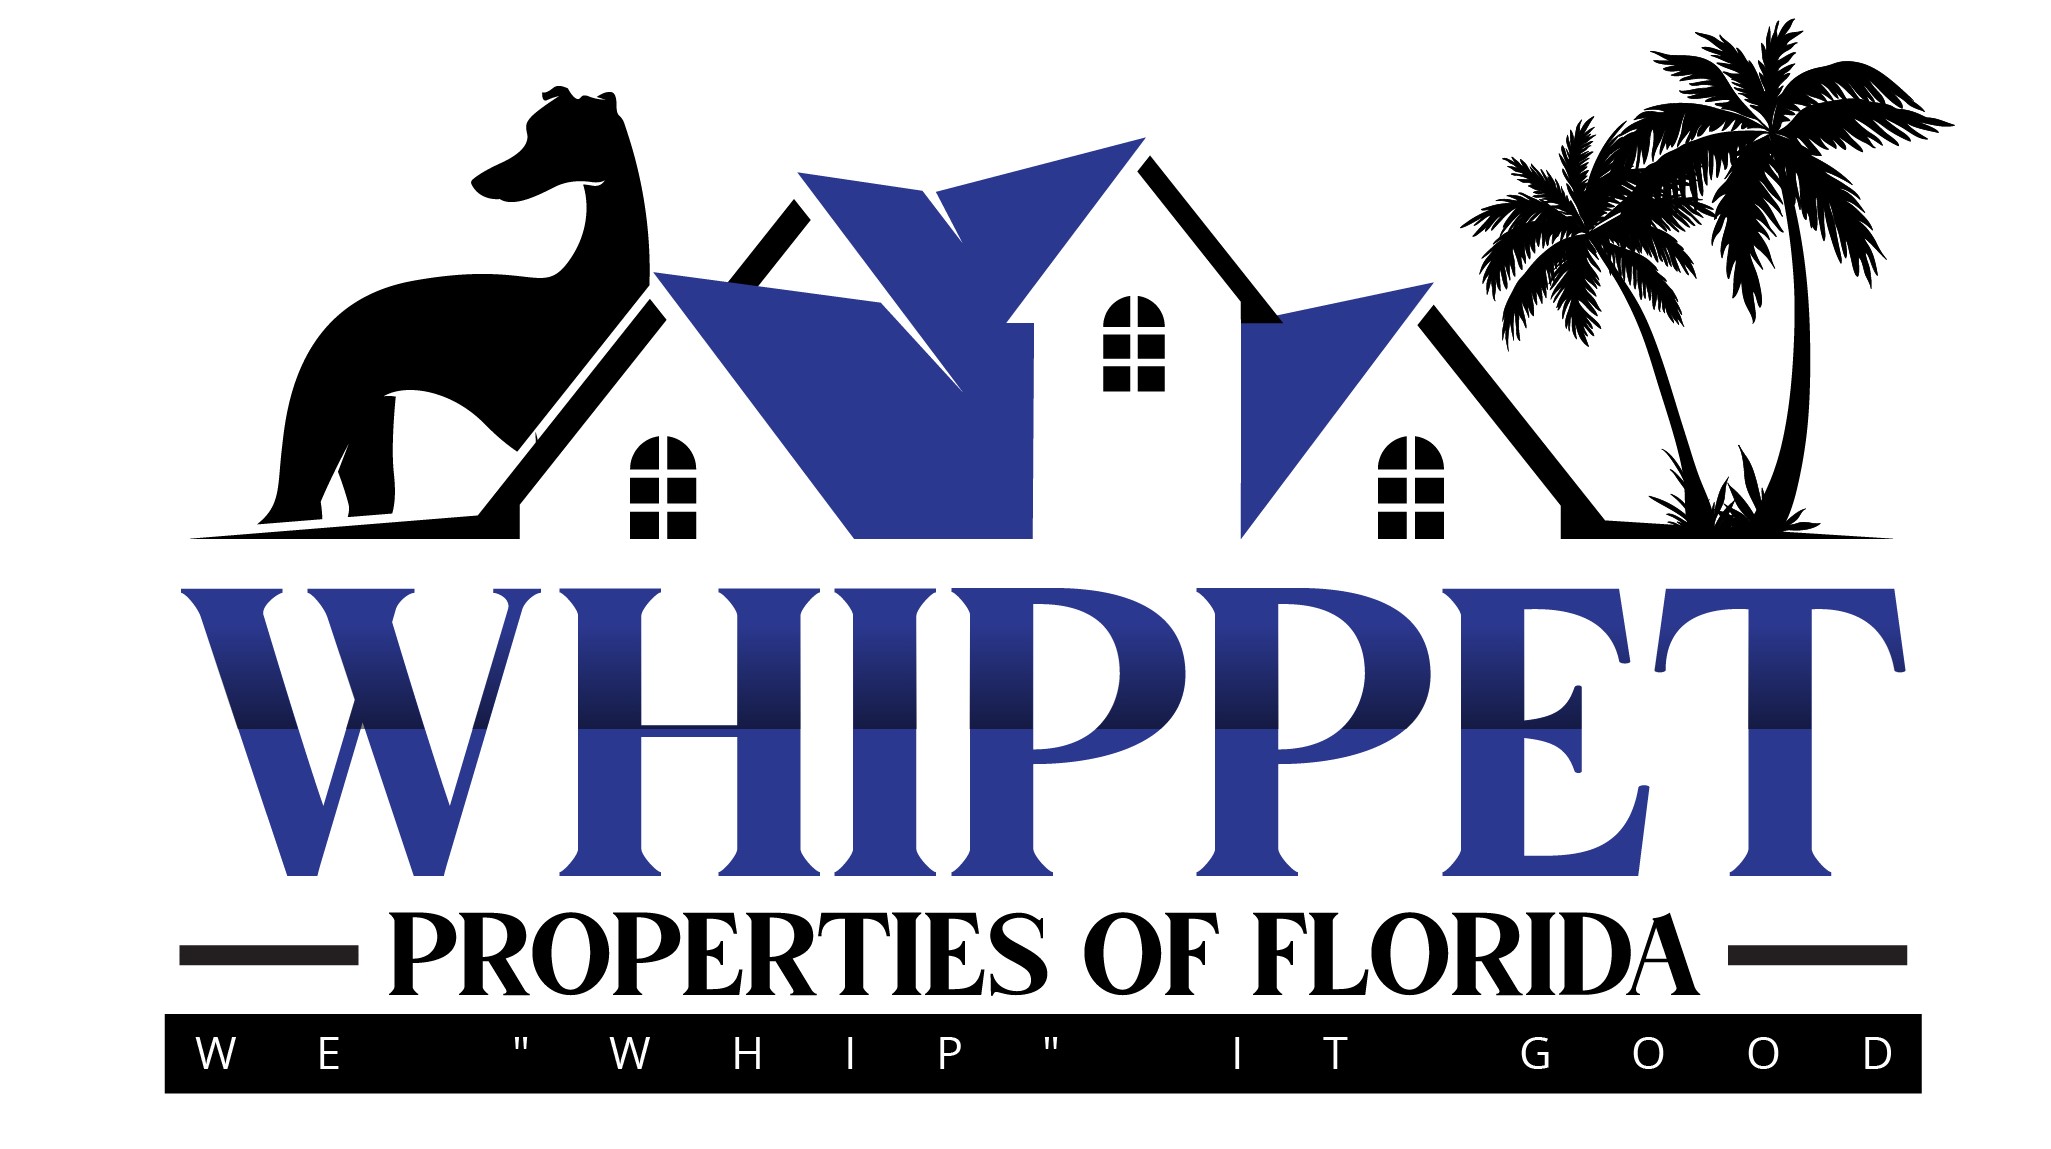 WHIPPET PROPERTIES OF FLORIDA